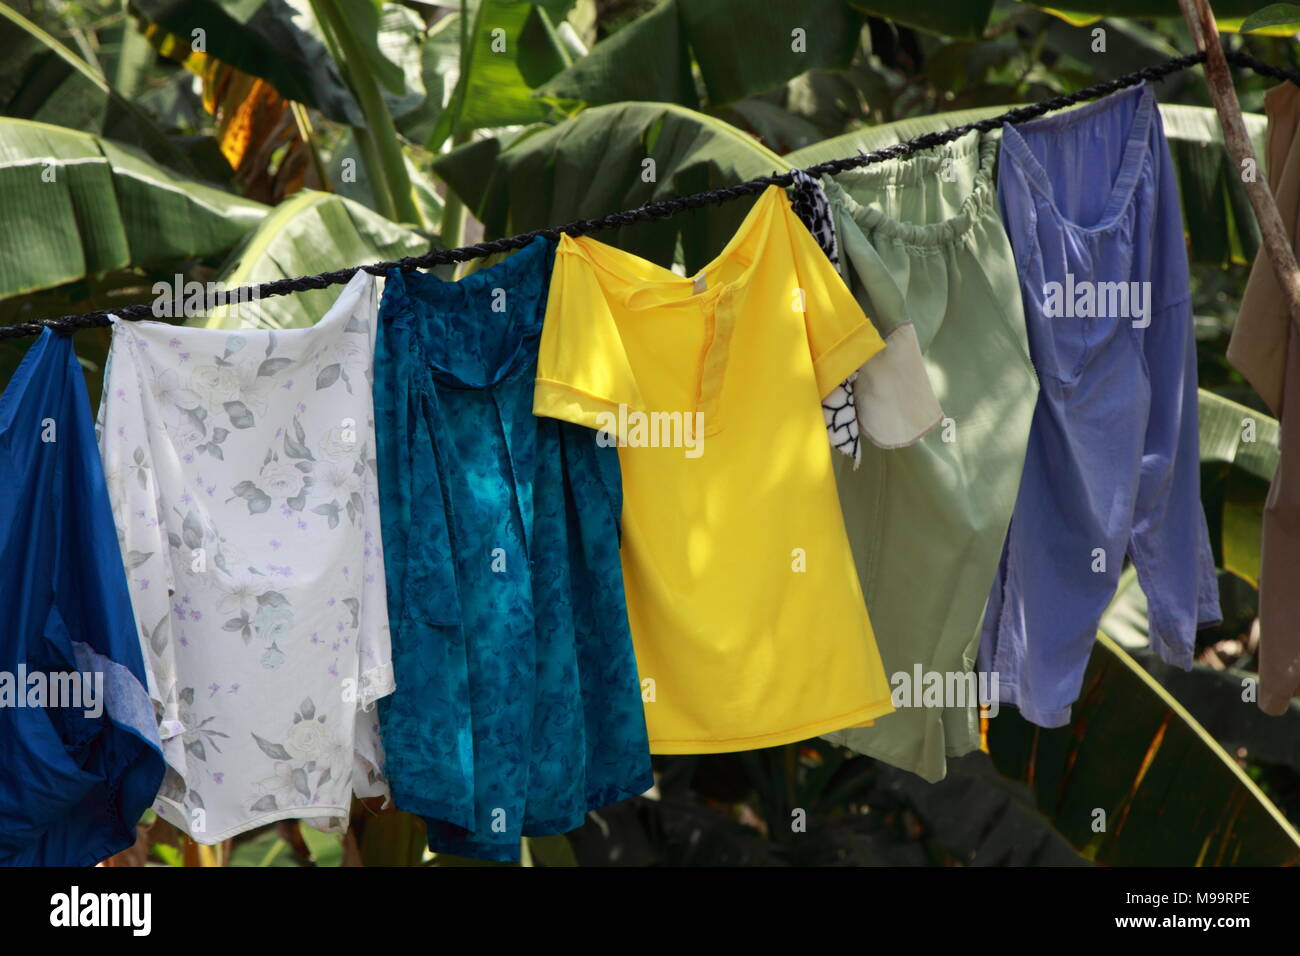 Clean laundry hanging to dry in the open air in the rainforest, Cuba. Stock Photo